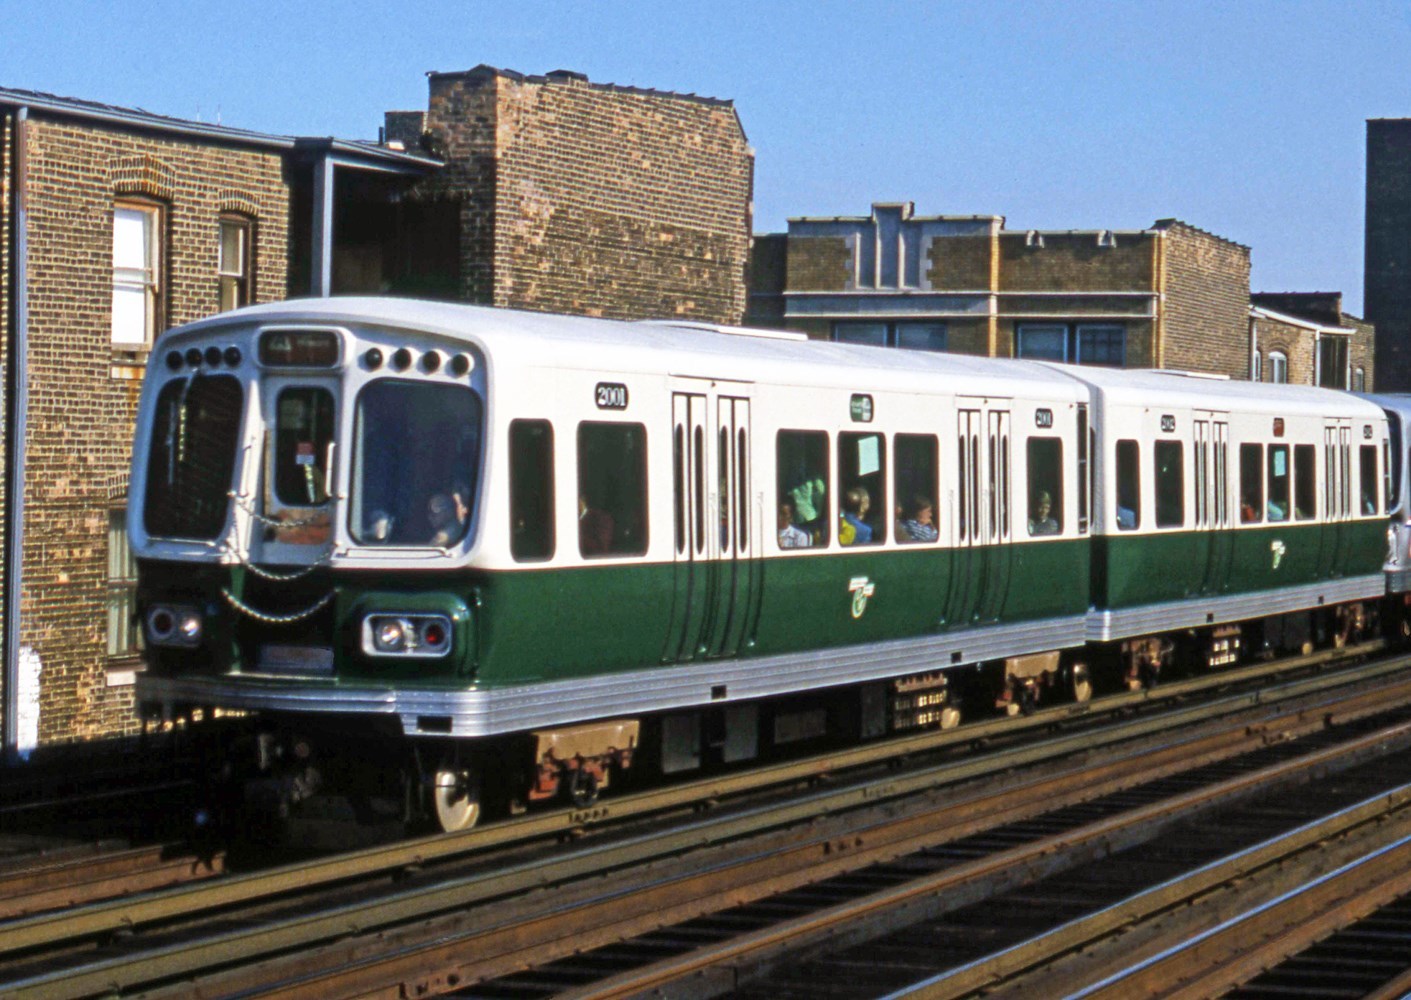 2000-Series railcars (courtesy of Louis Gerard)